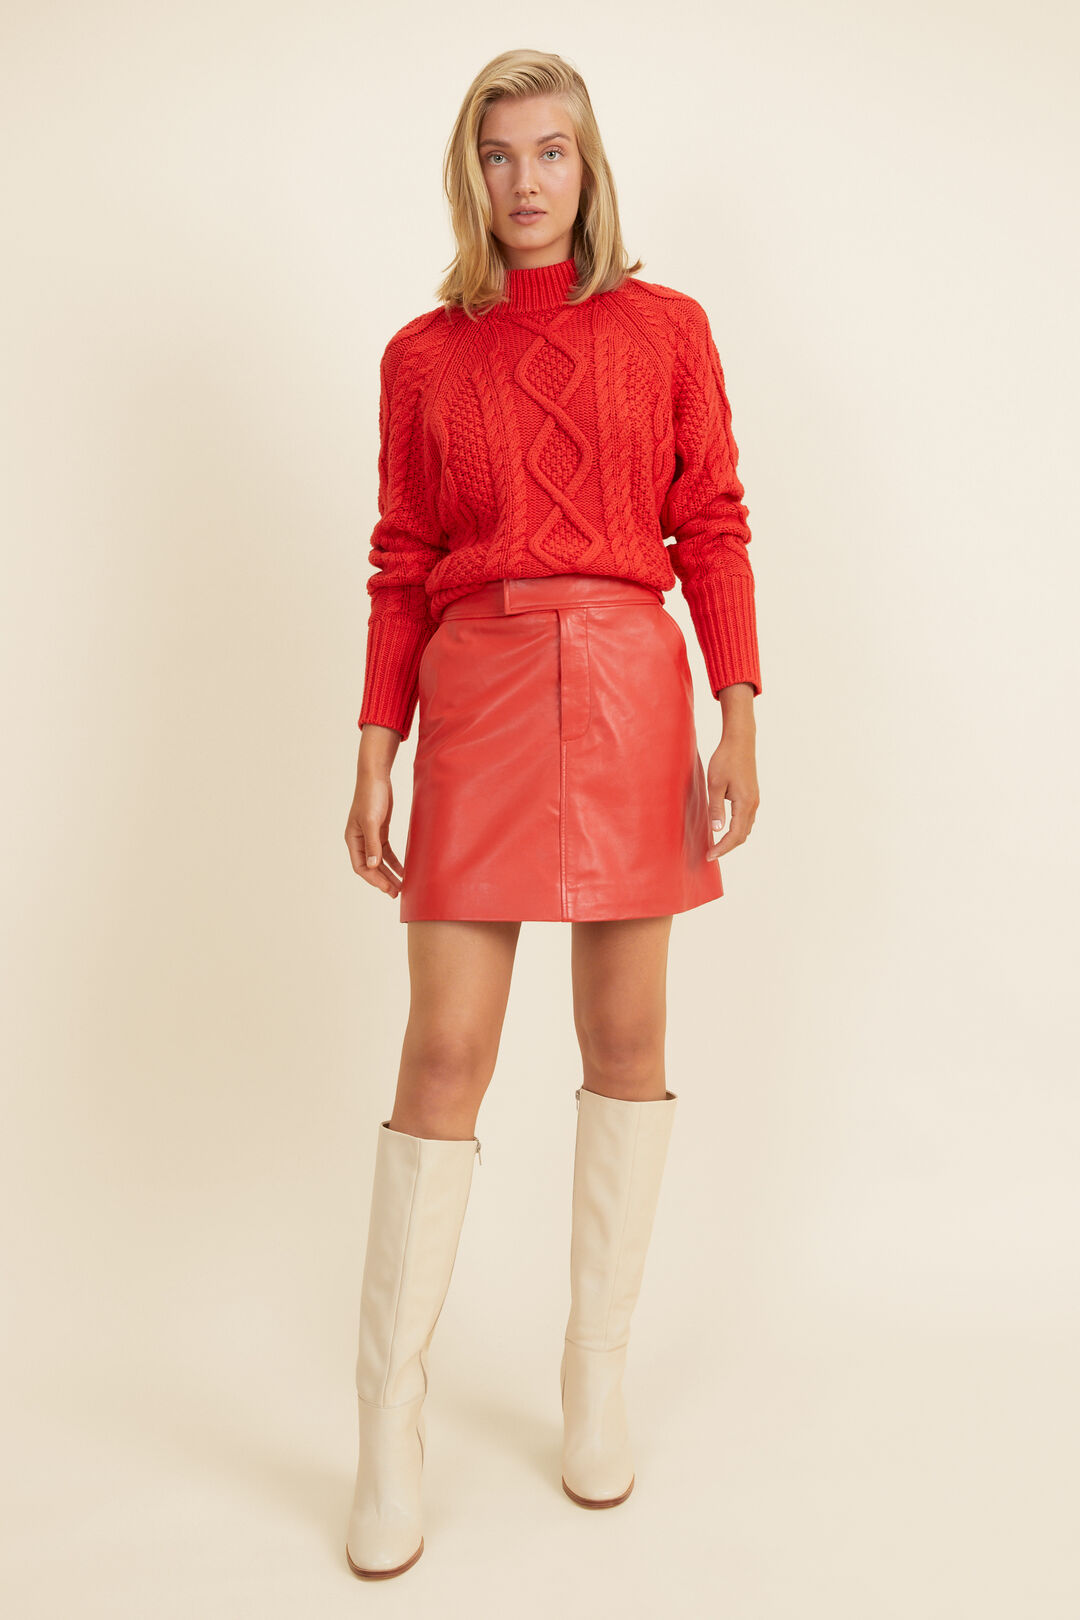 Leather A Line Mini Skirt  Candy Red  hi-res